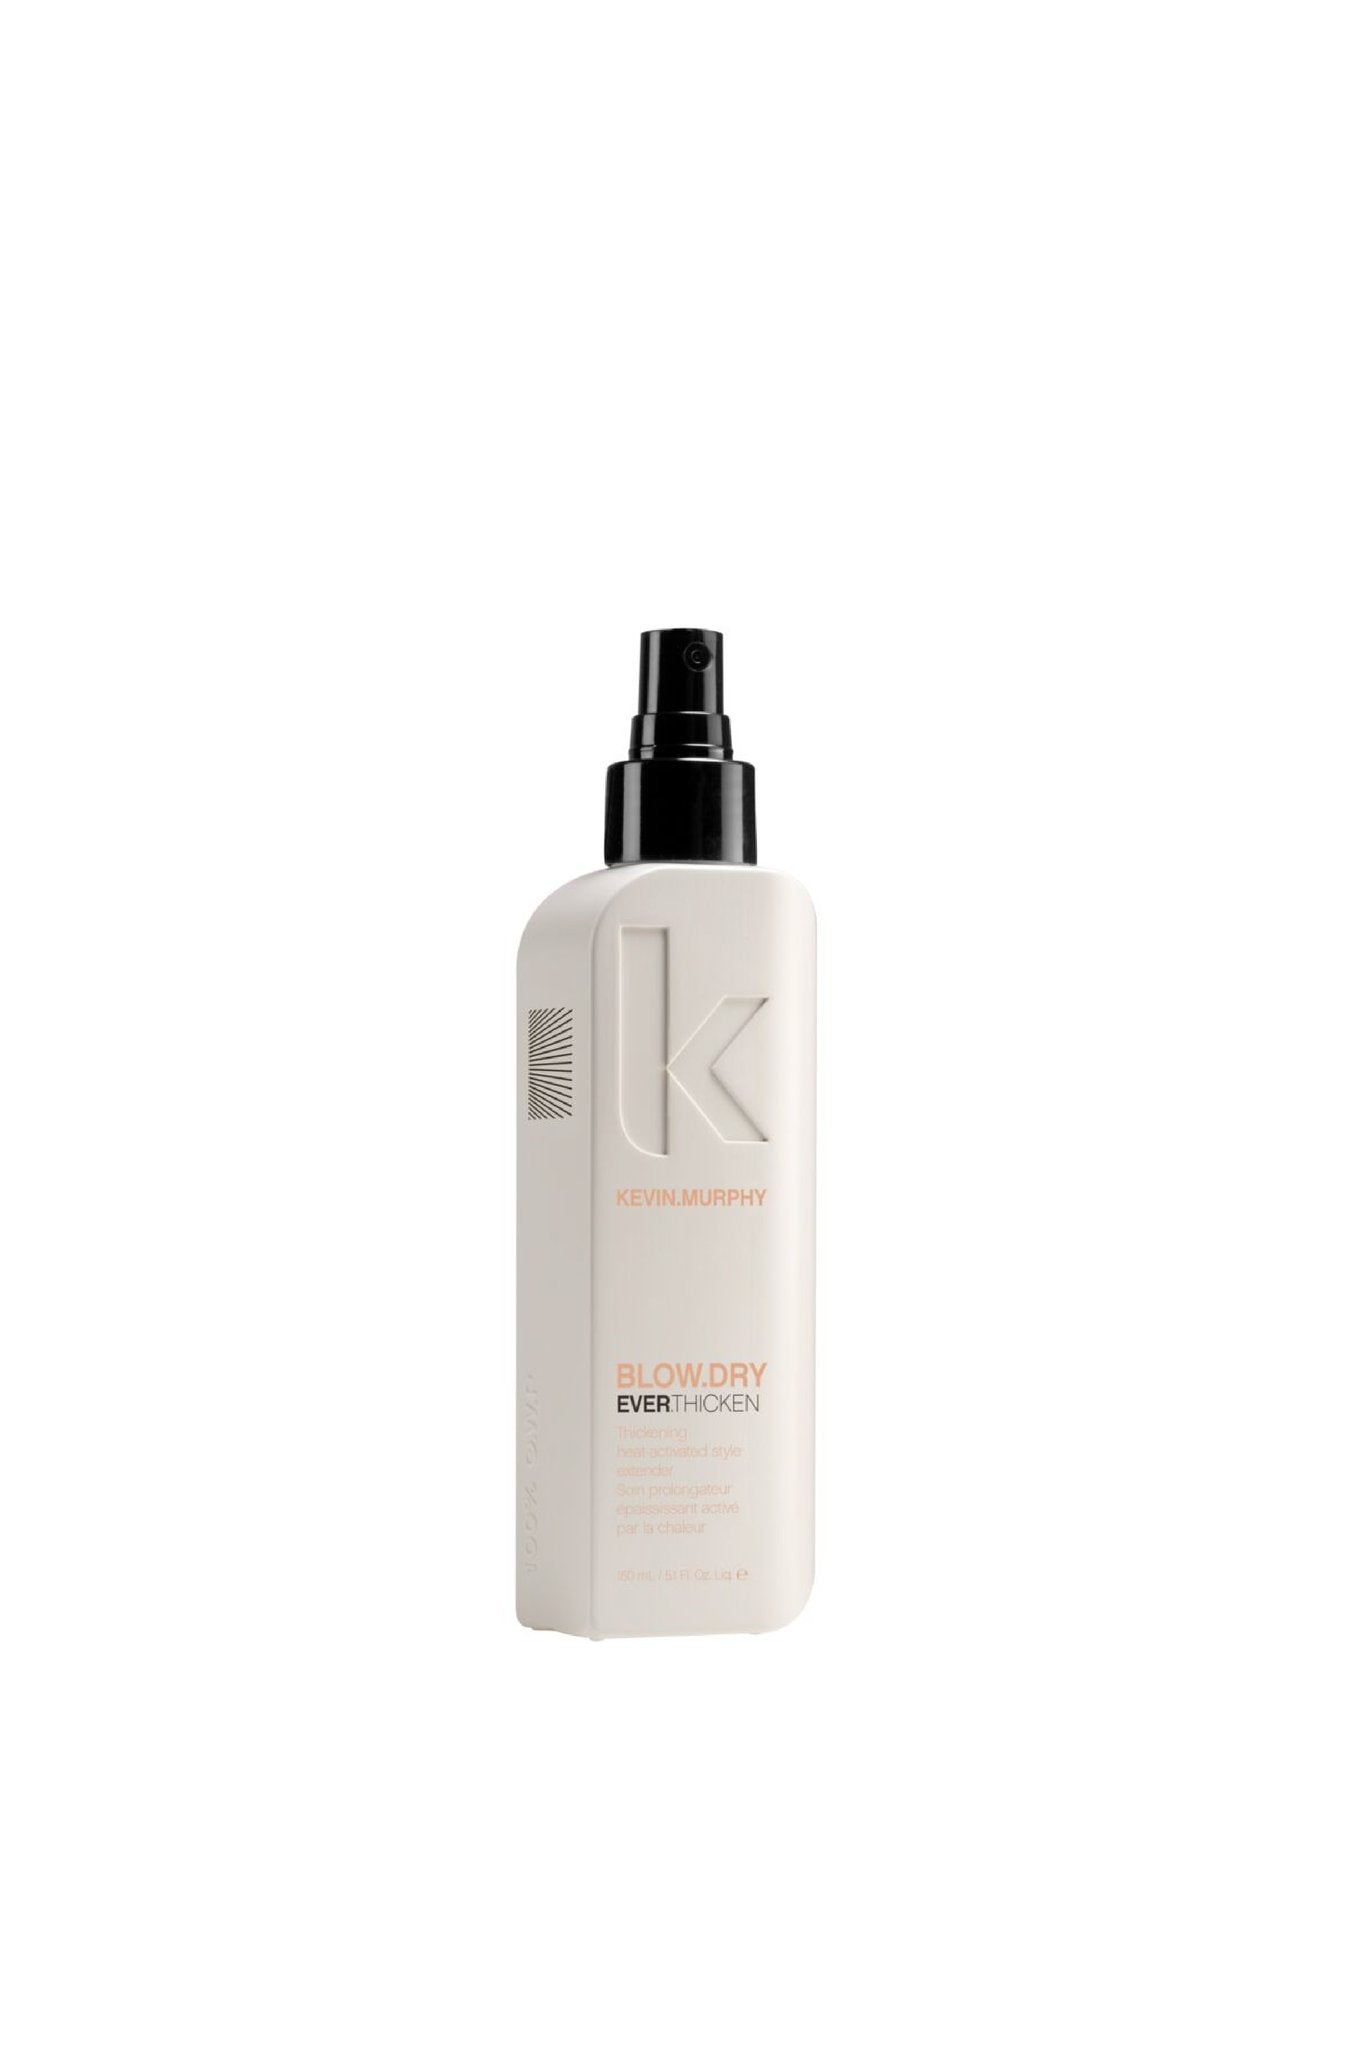 KEVIN MURPHY Blow Dry Ever Thicken - 150 ml